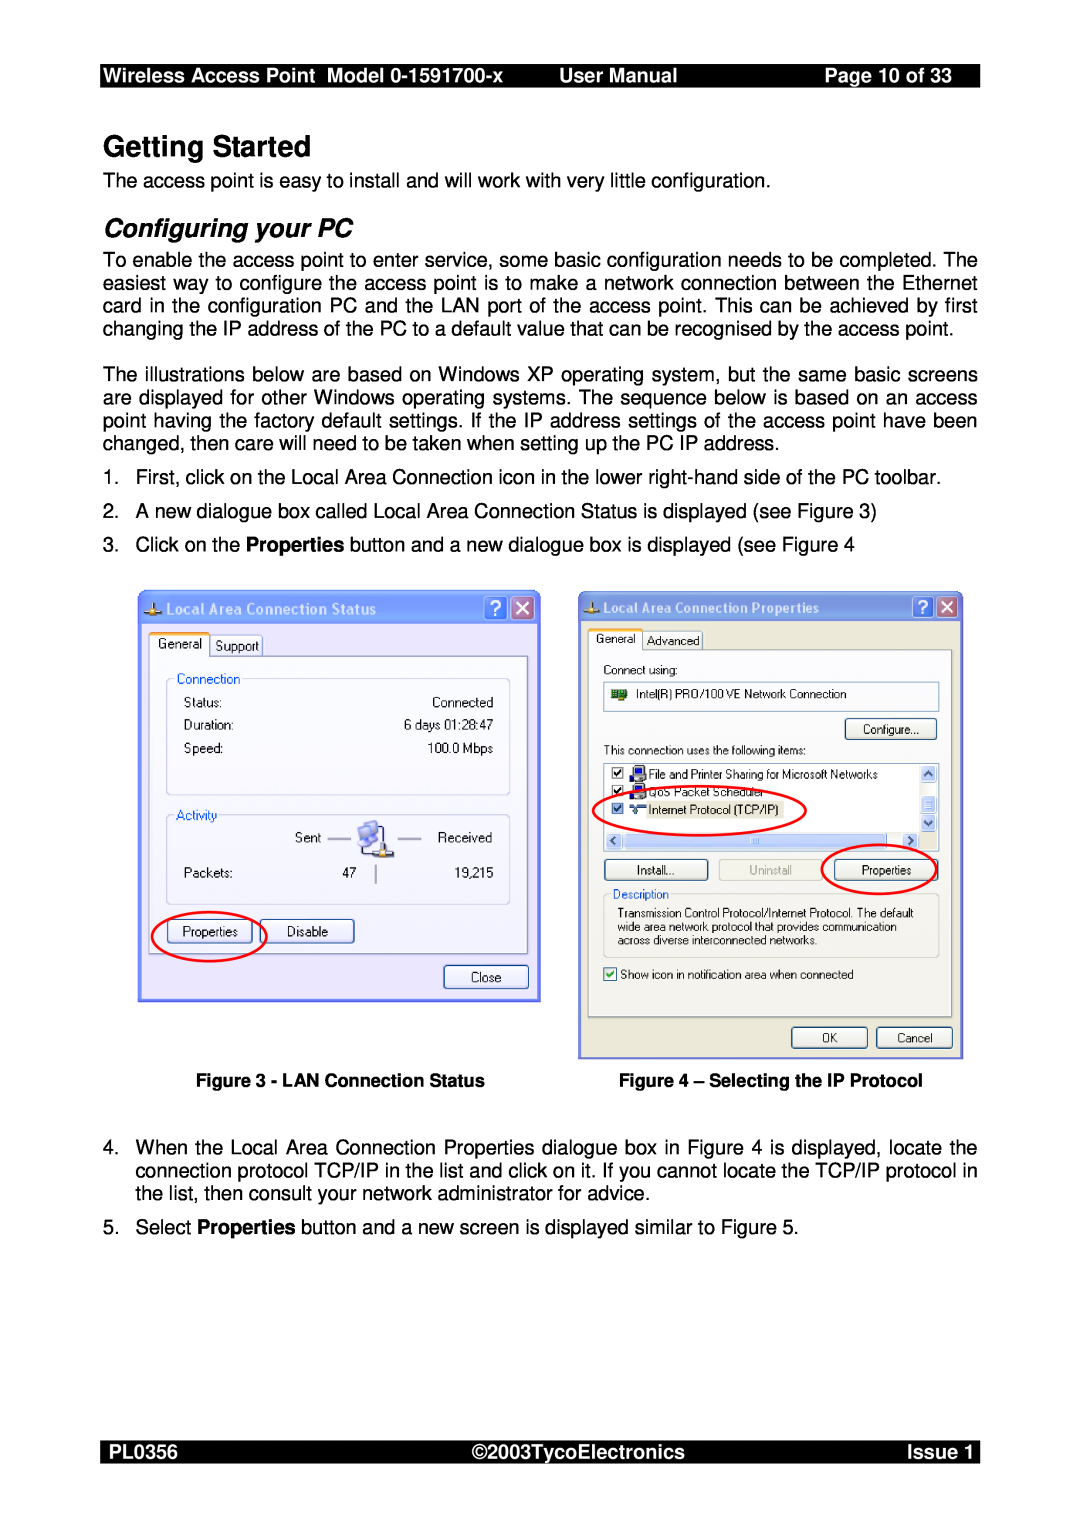 Tyco 0-1591700-x Getting Started, Configuring your PC, Page 10 of, Wireless Access Point Model, User Manual, PL0356, Issue 